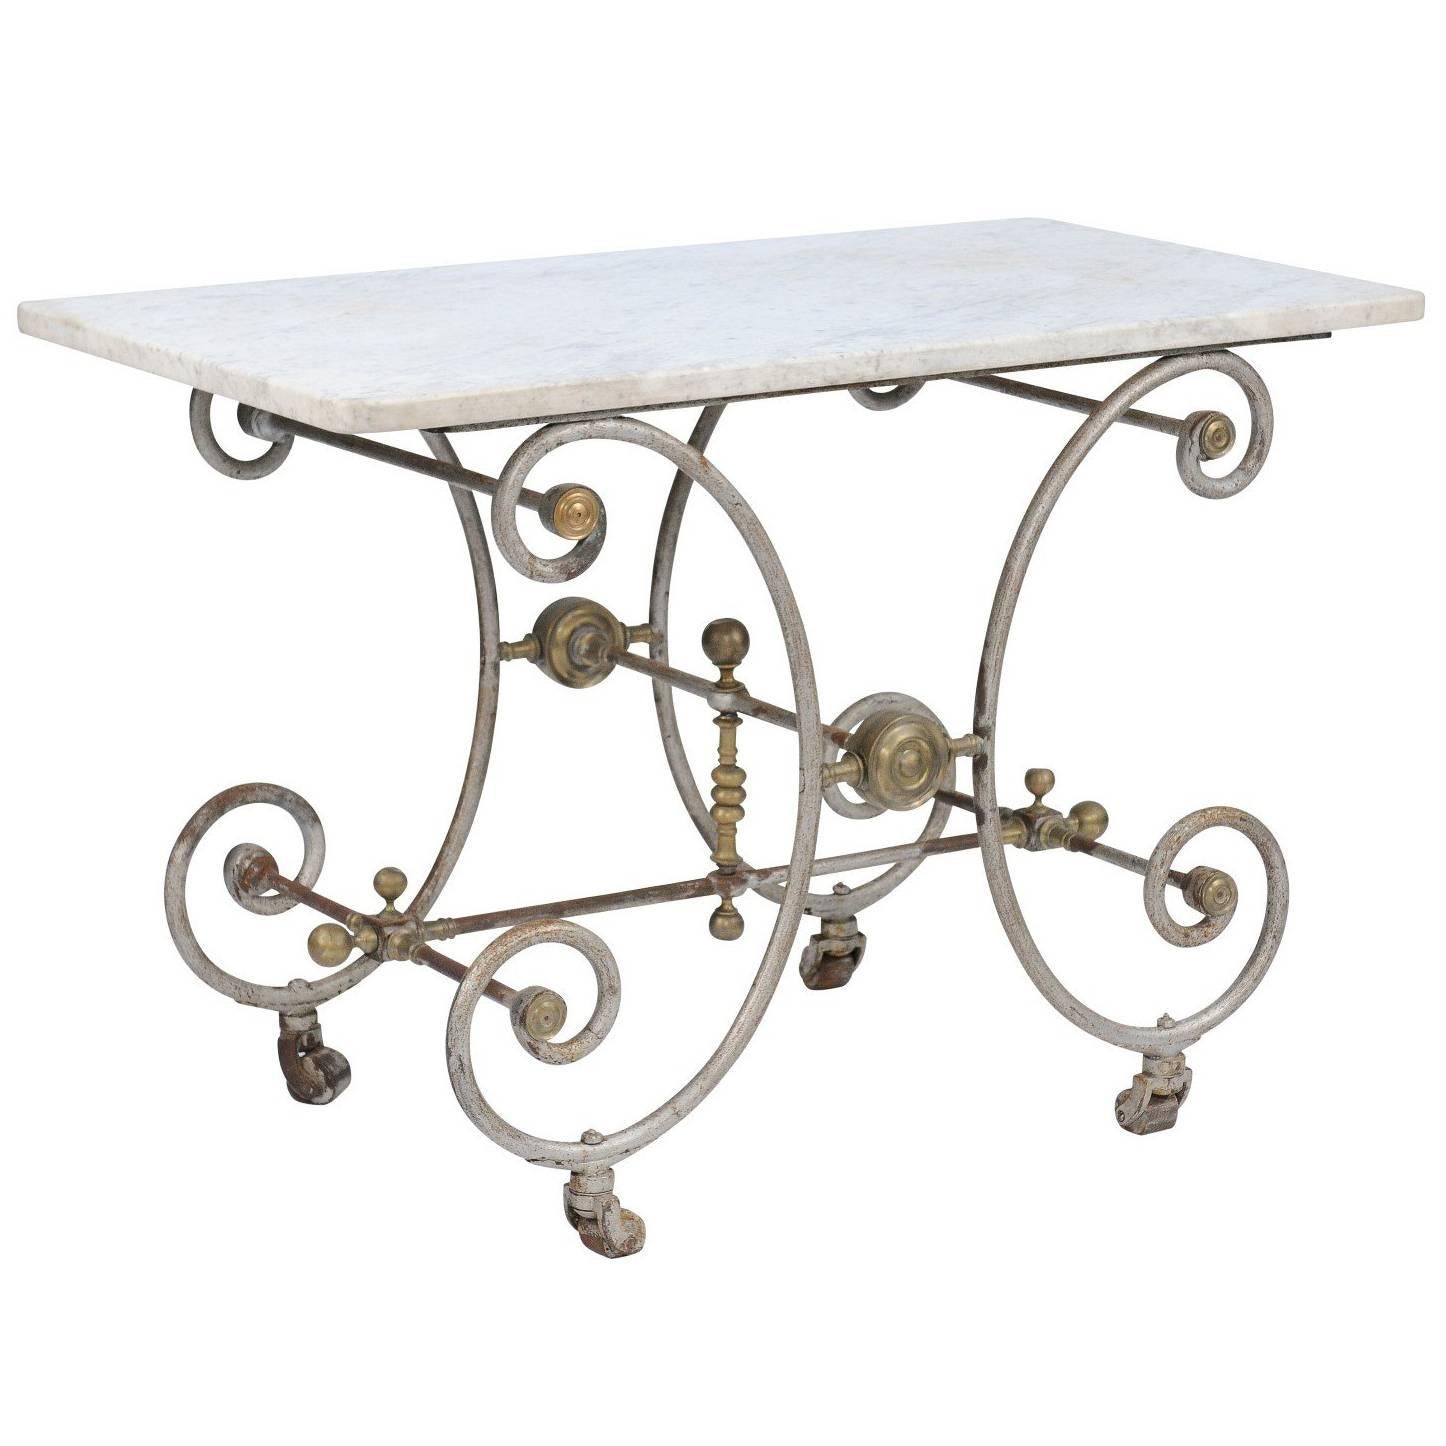 French Iron and Marble-Top Baker's Table with Curly Gilded Legs and Casters